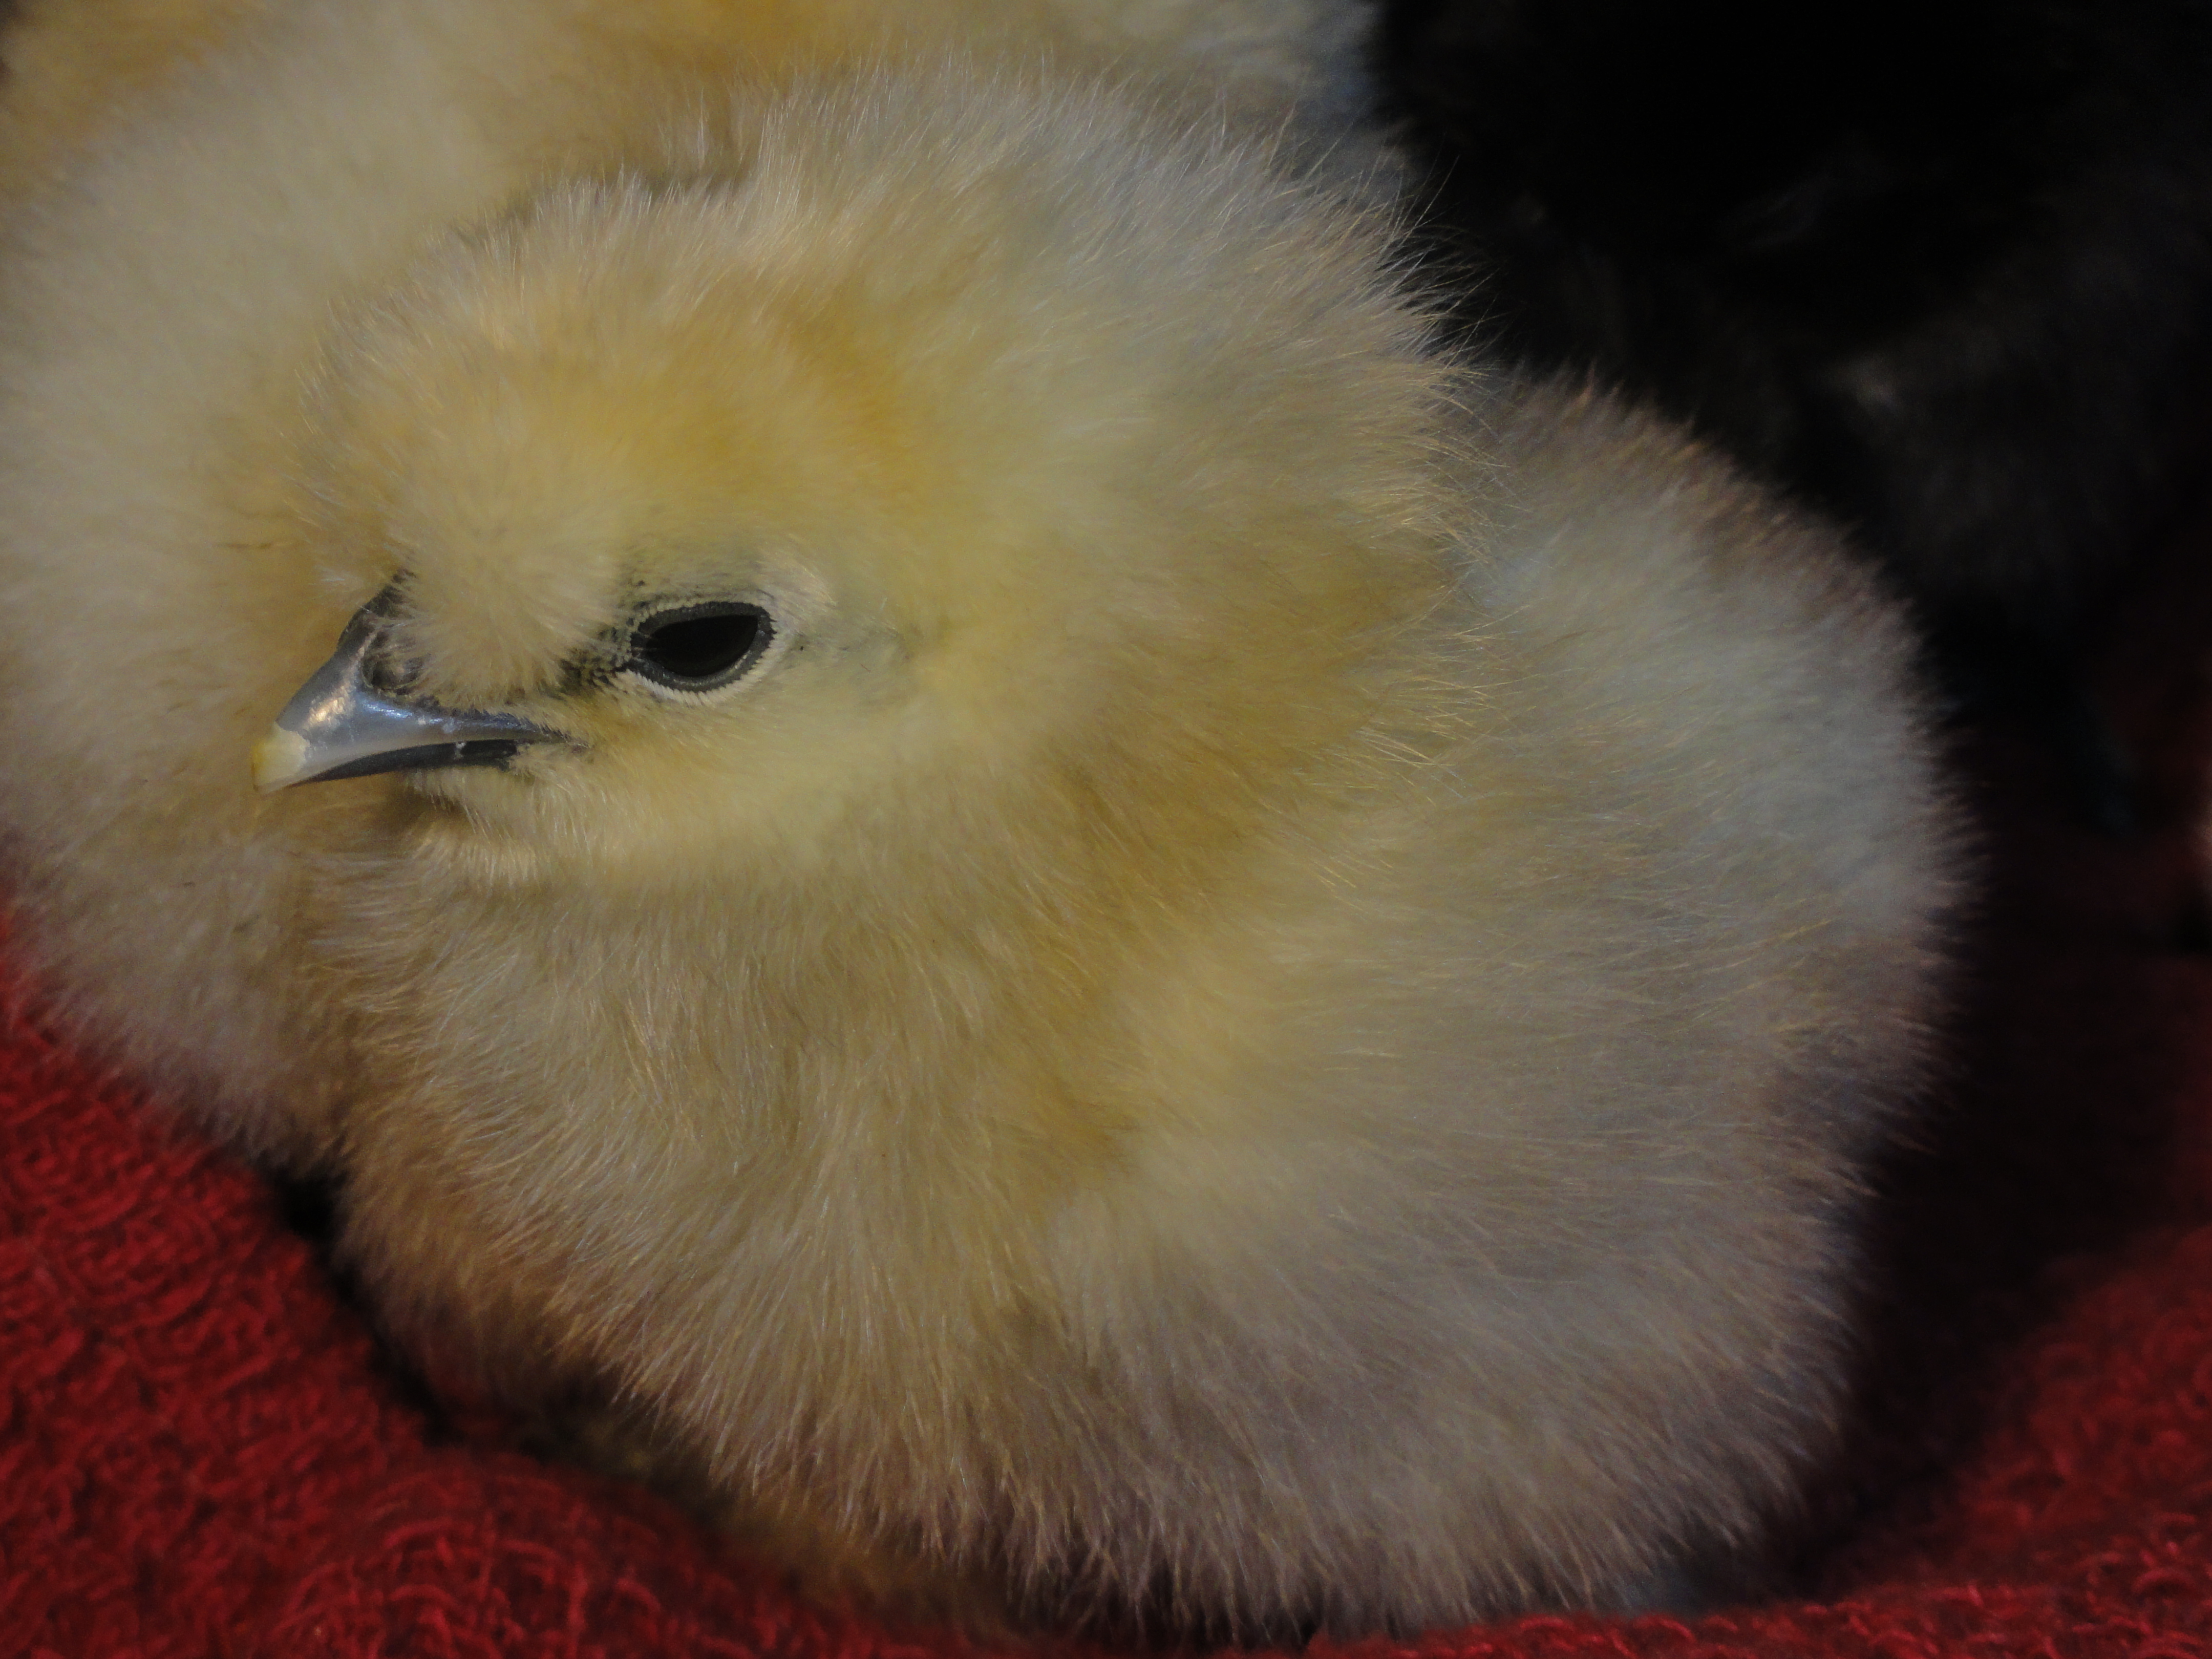 Baby Silkie - born 2/11/13.  This is Amy Farrah Fowler.  LOL